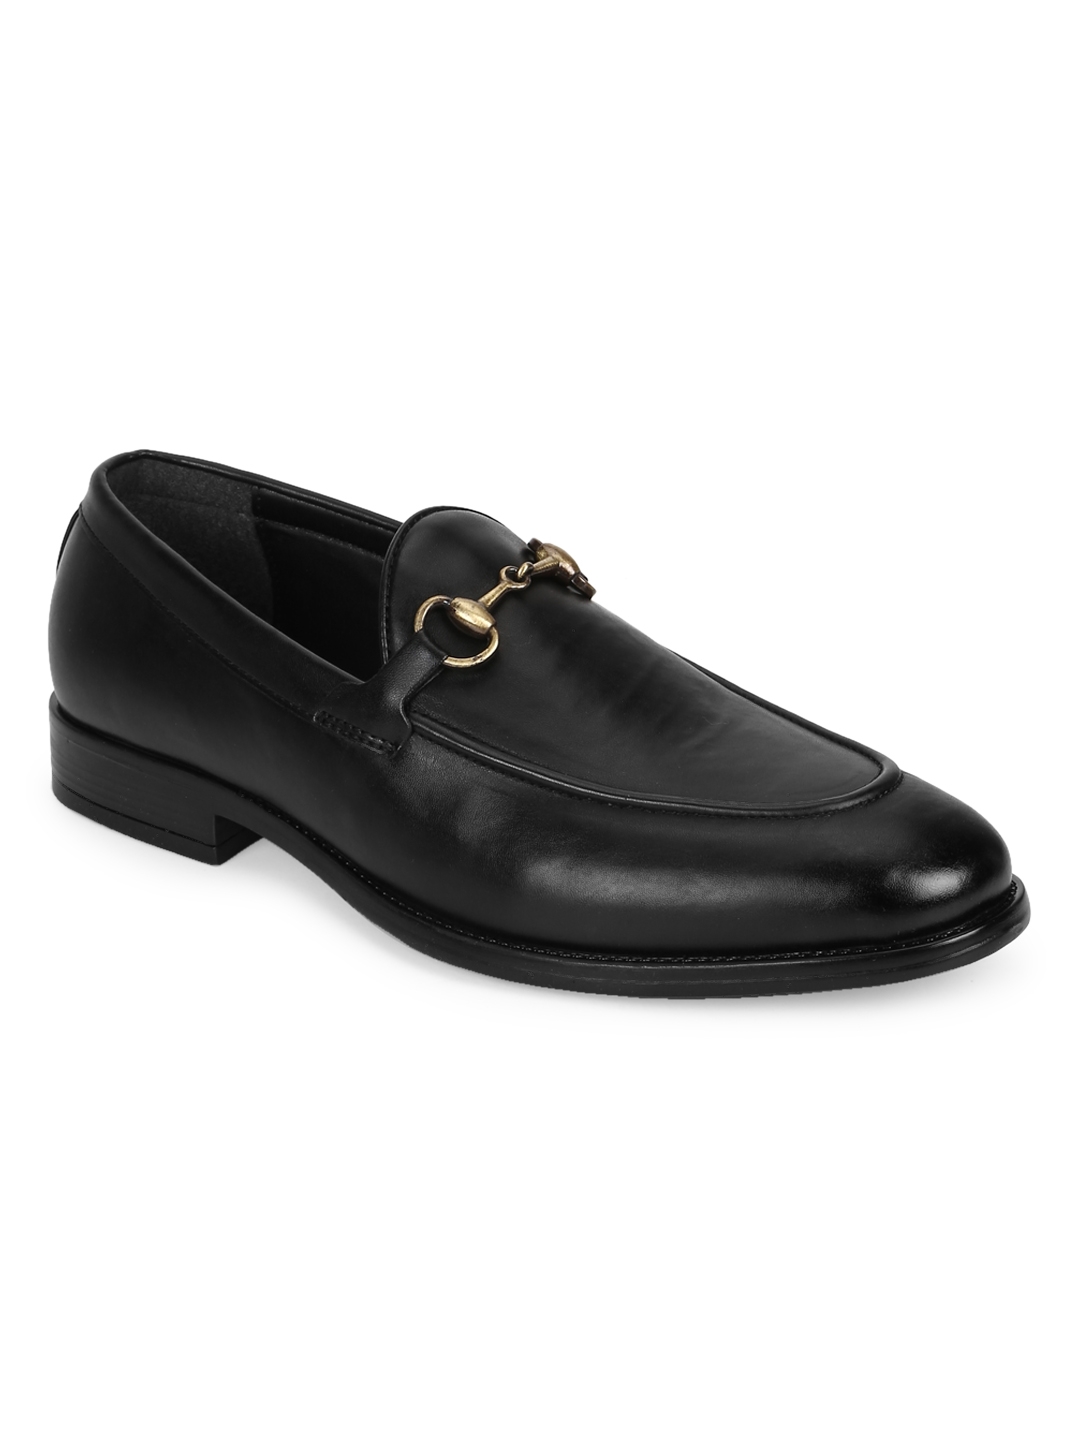 Truffle Collection | Black PU Men's Low Heel Chained Loafers